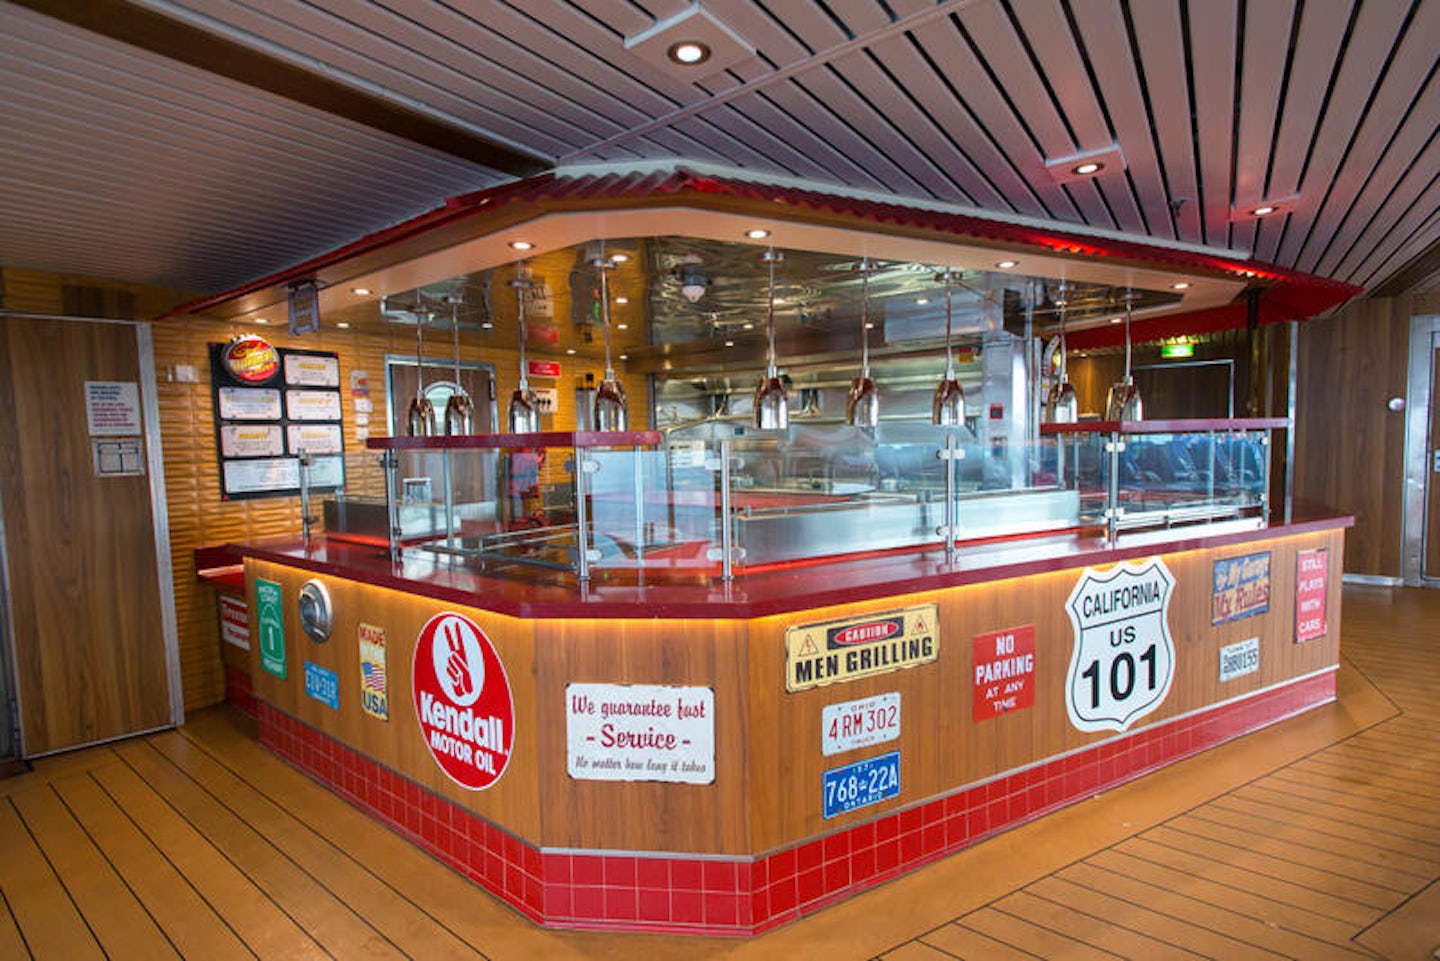 Guy's Burger Joint on Carnival Pride